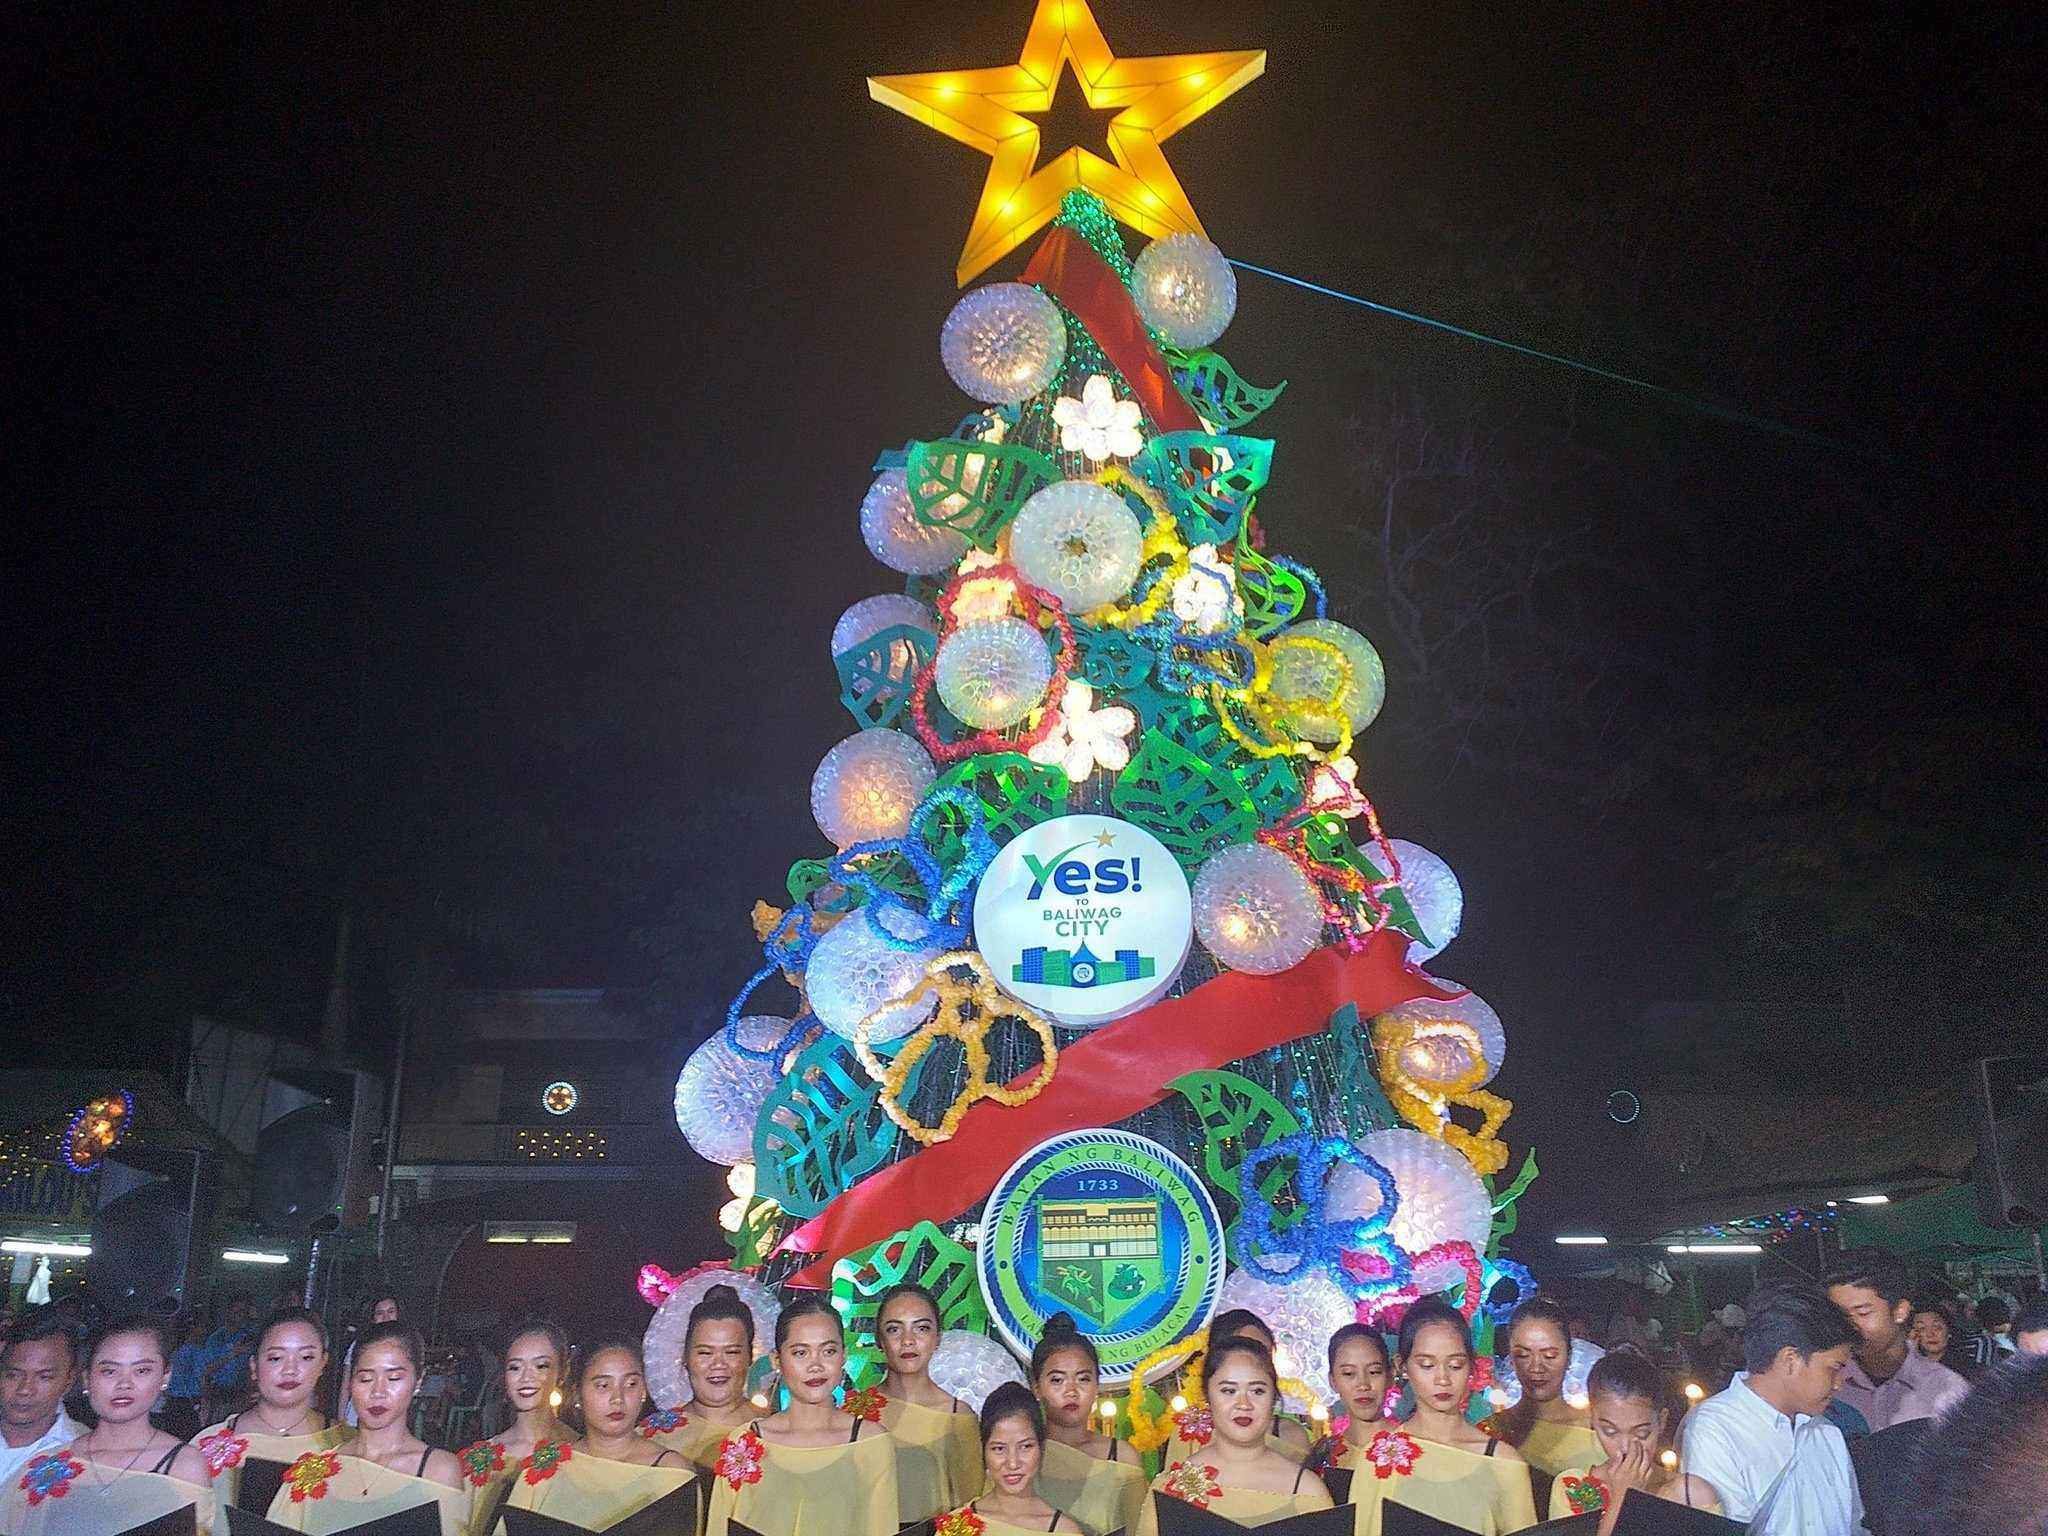 LOOK: Christmas tree made out of plastic bottles, cups, utensils in Bulacan